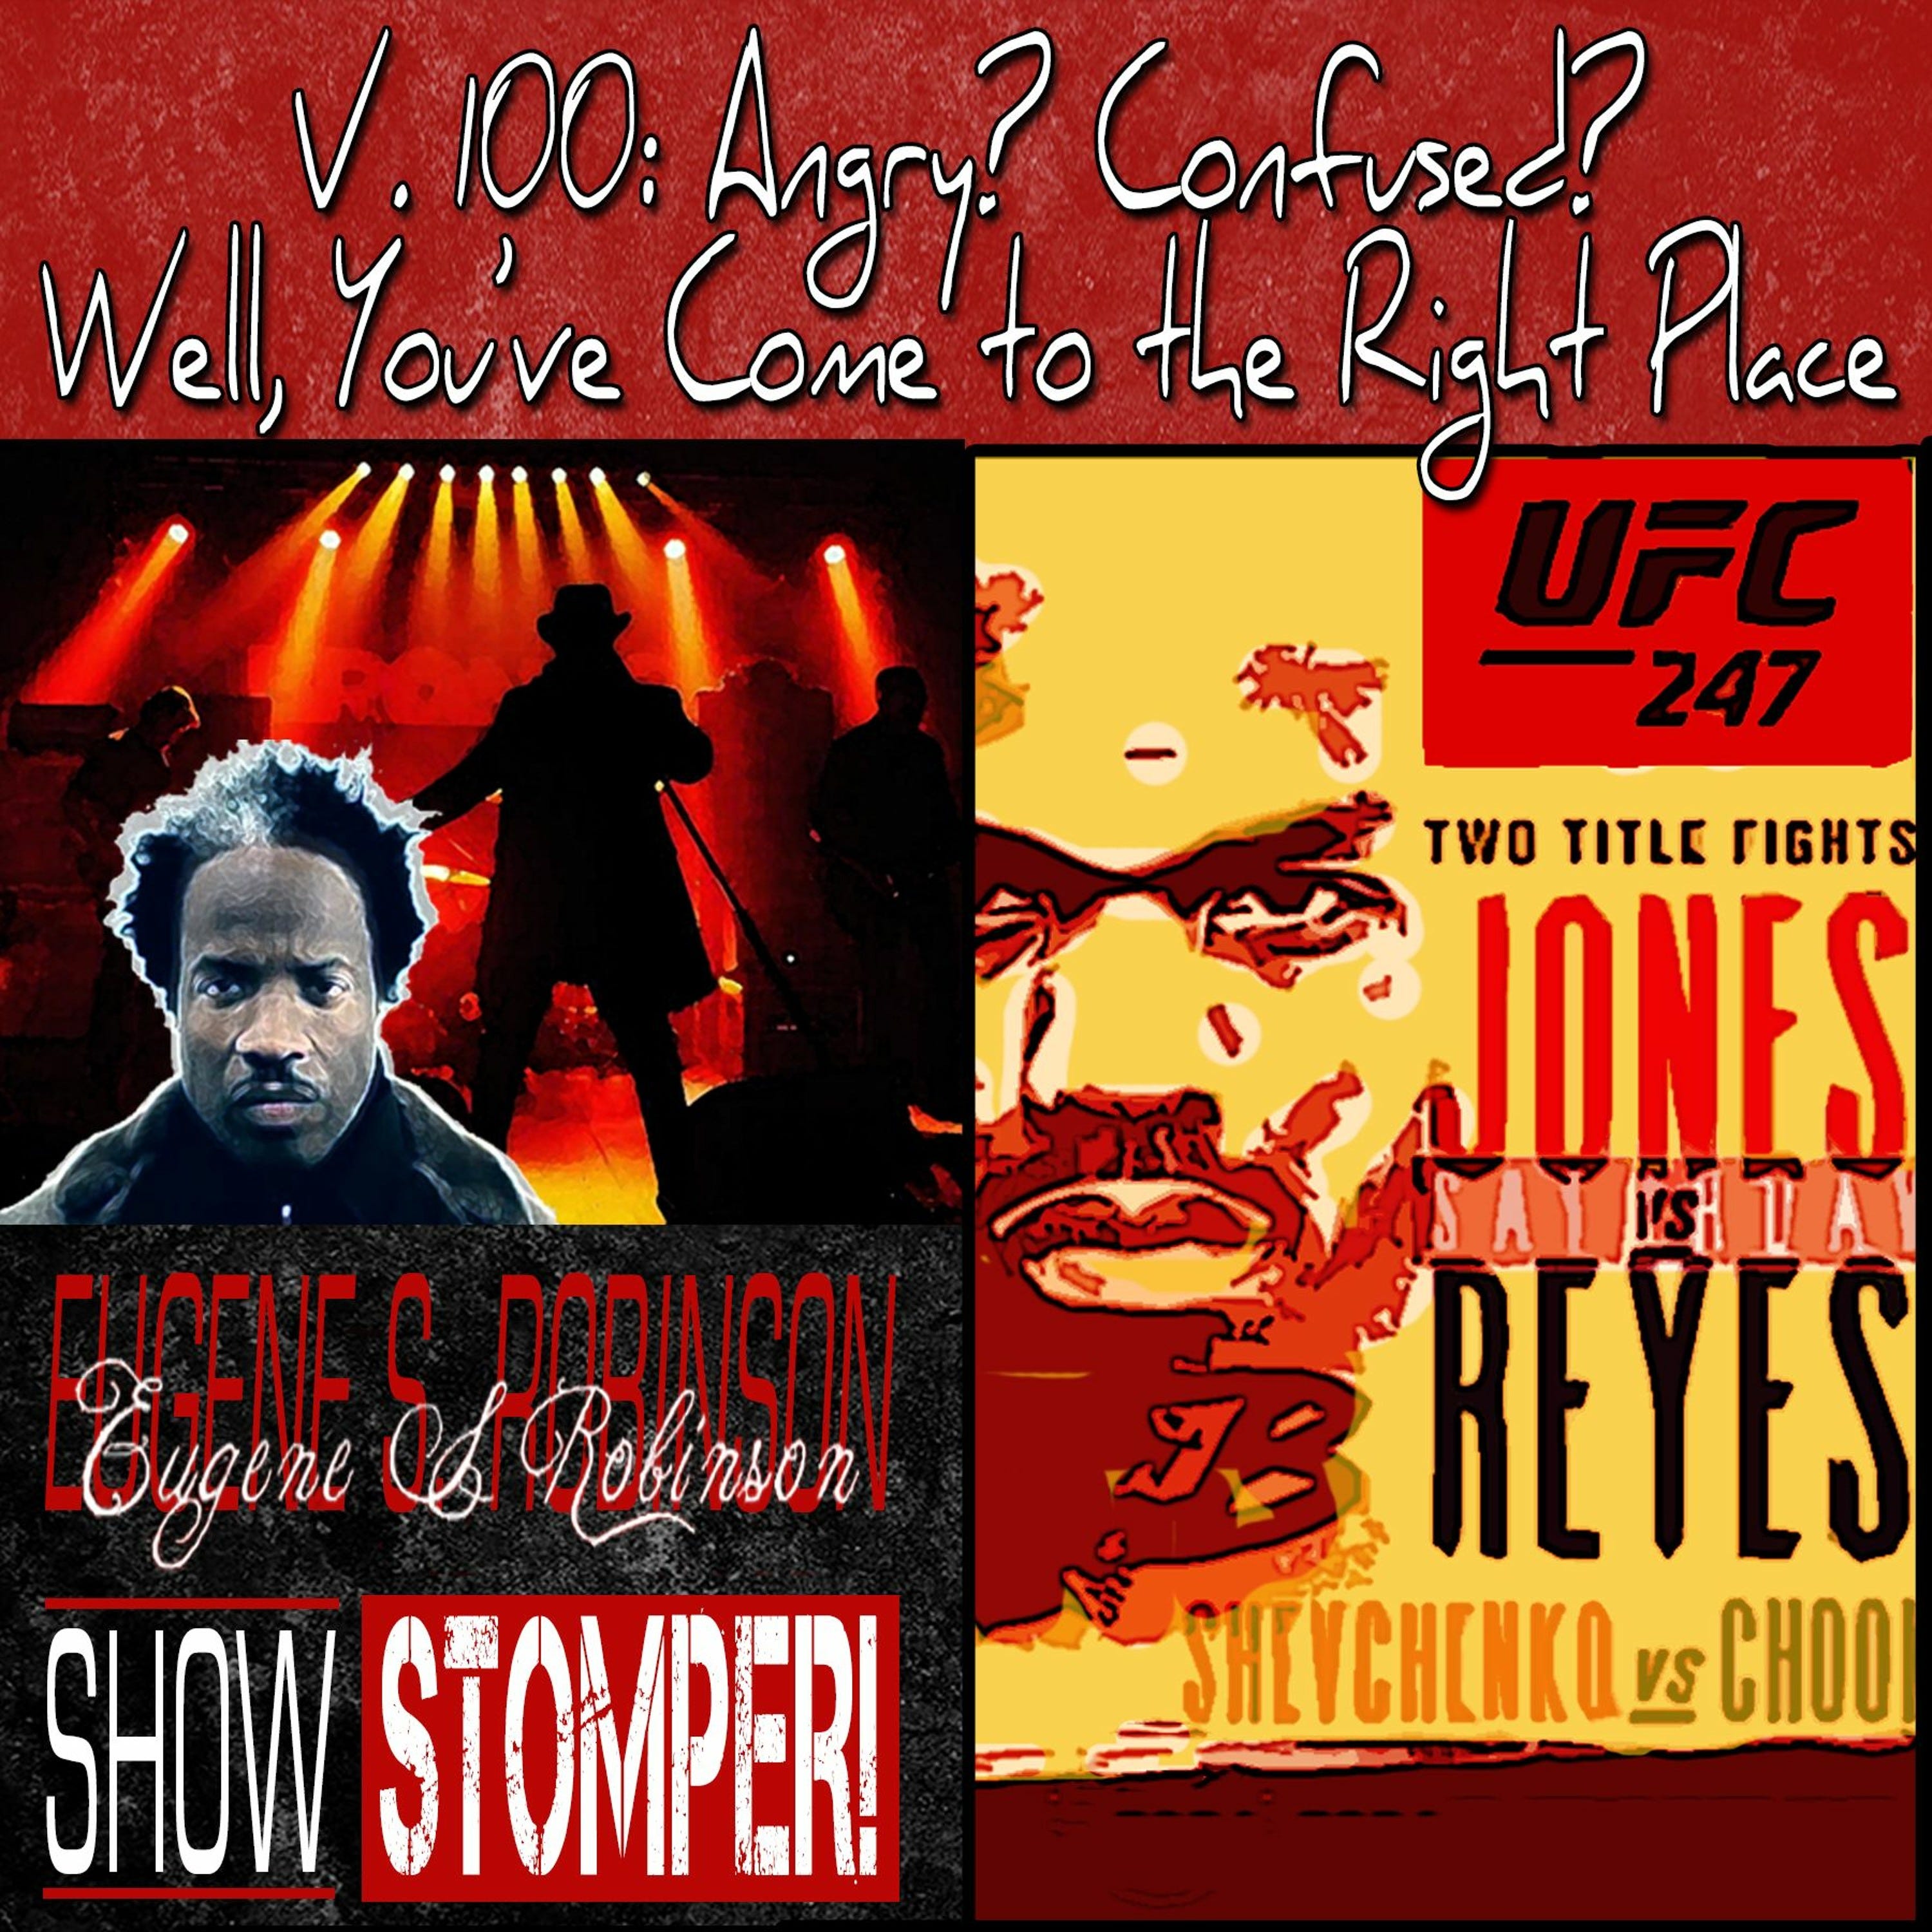 V. 100: Angry? Confused? Well, You've Come To The Right Place On The Eugene S. Robinson Show Stom